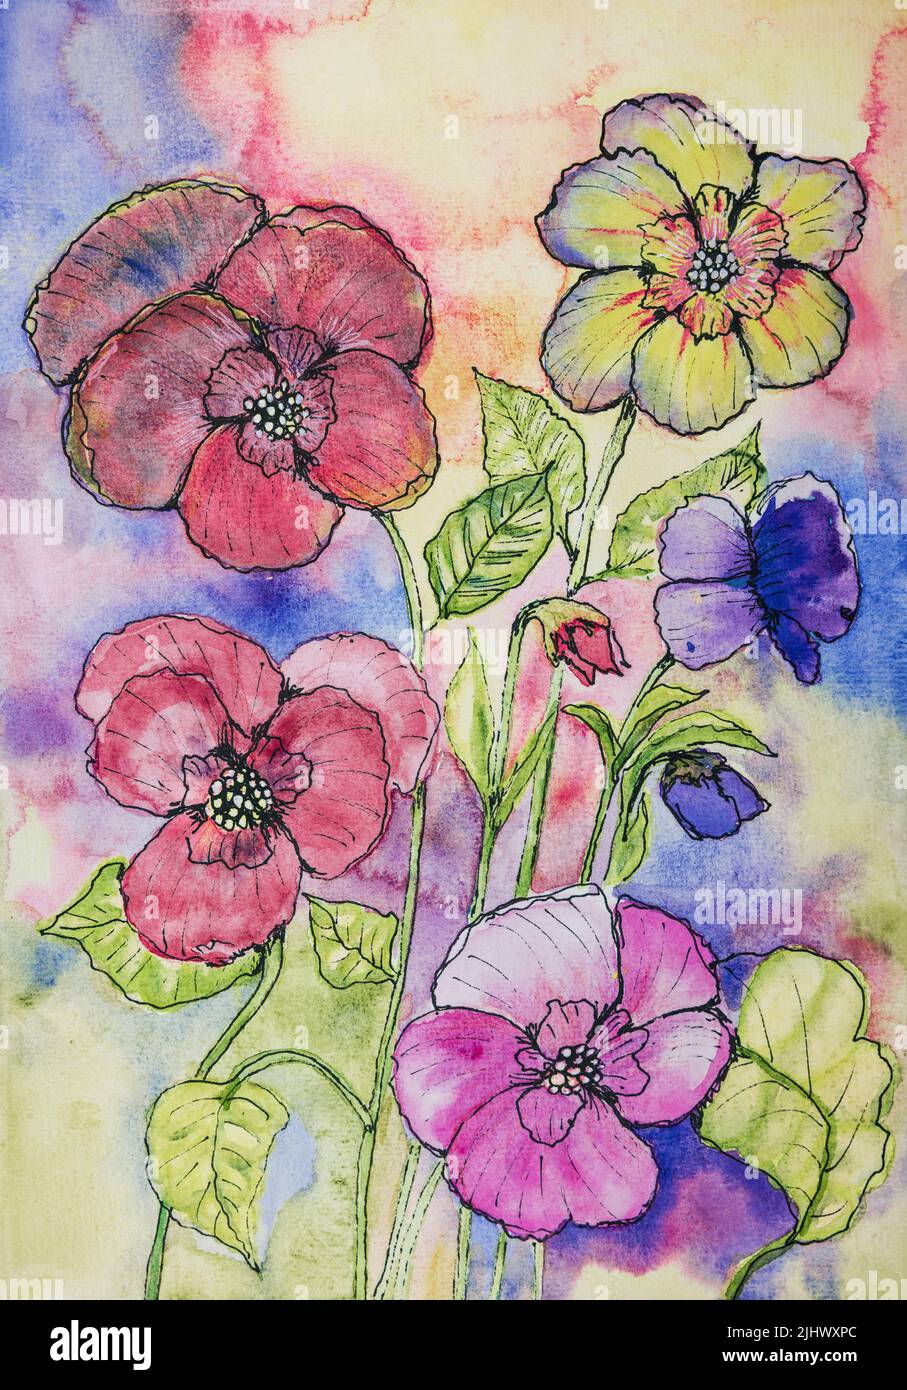 Pansies watercolor doodle. The dabbing technique near the edges gives a soft focus effect due to the altered surface roughness of the paper. Stock Photo